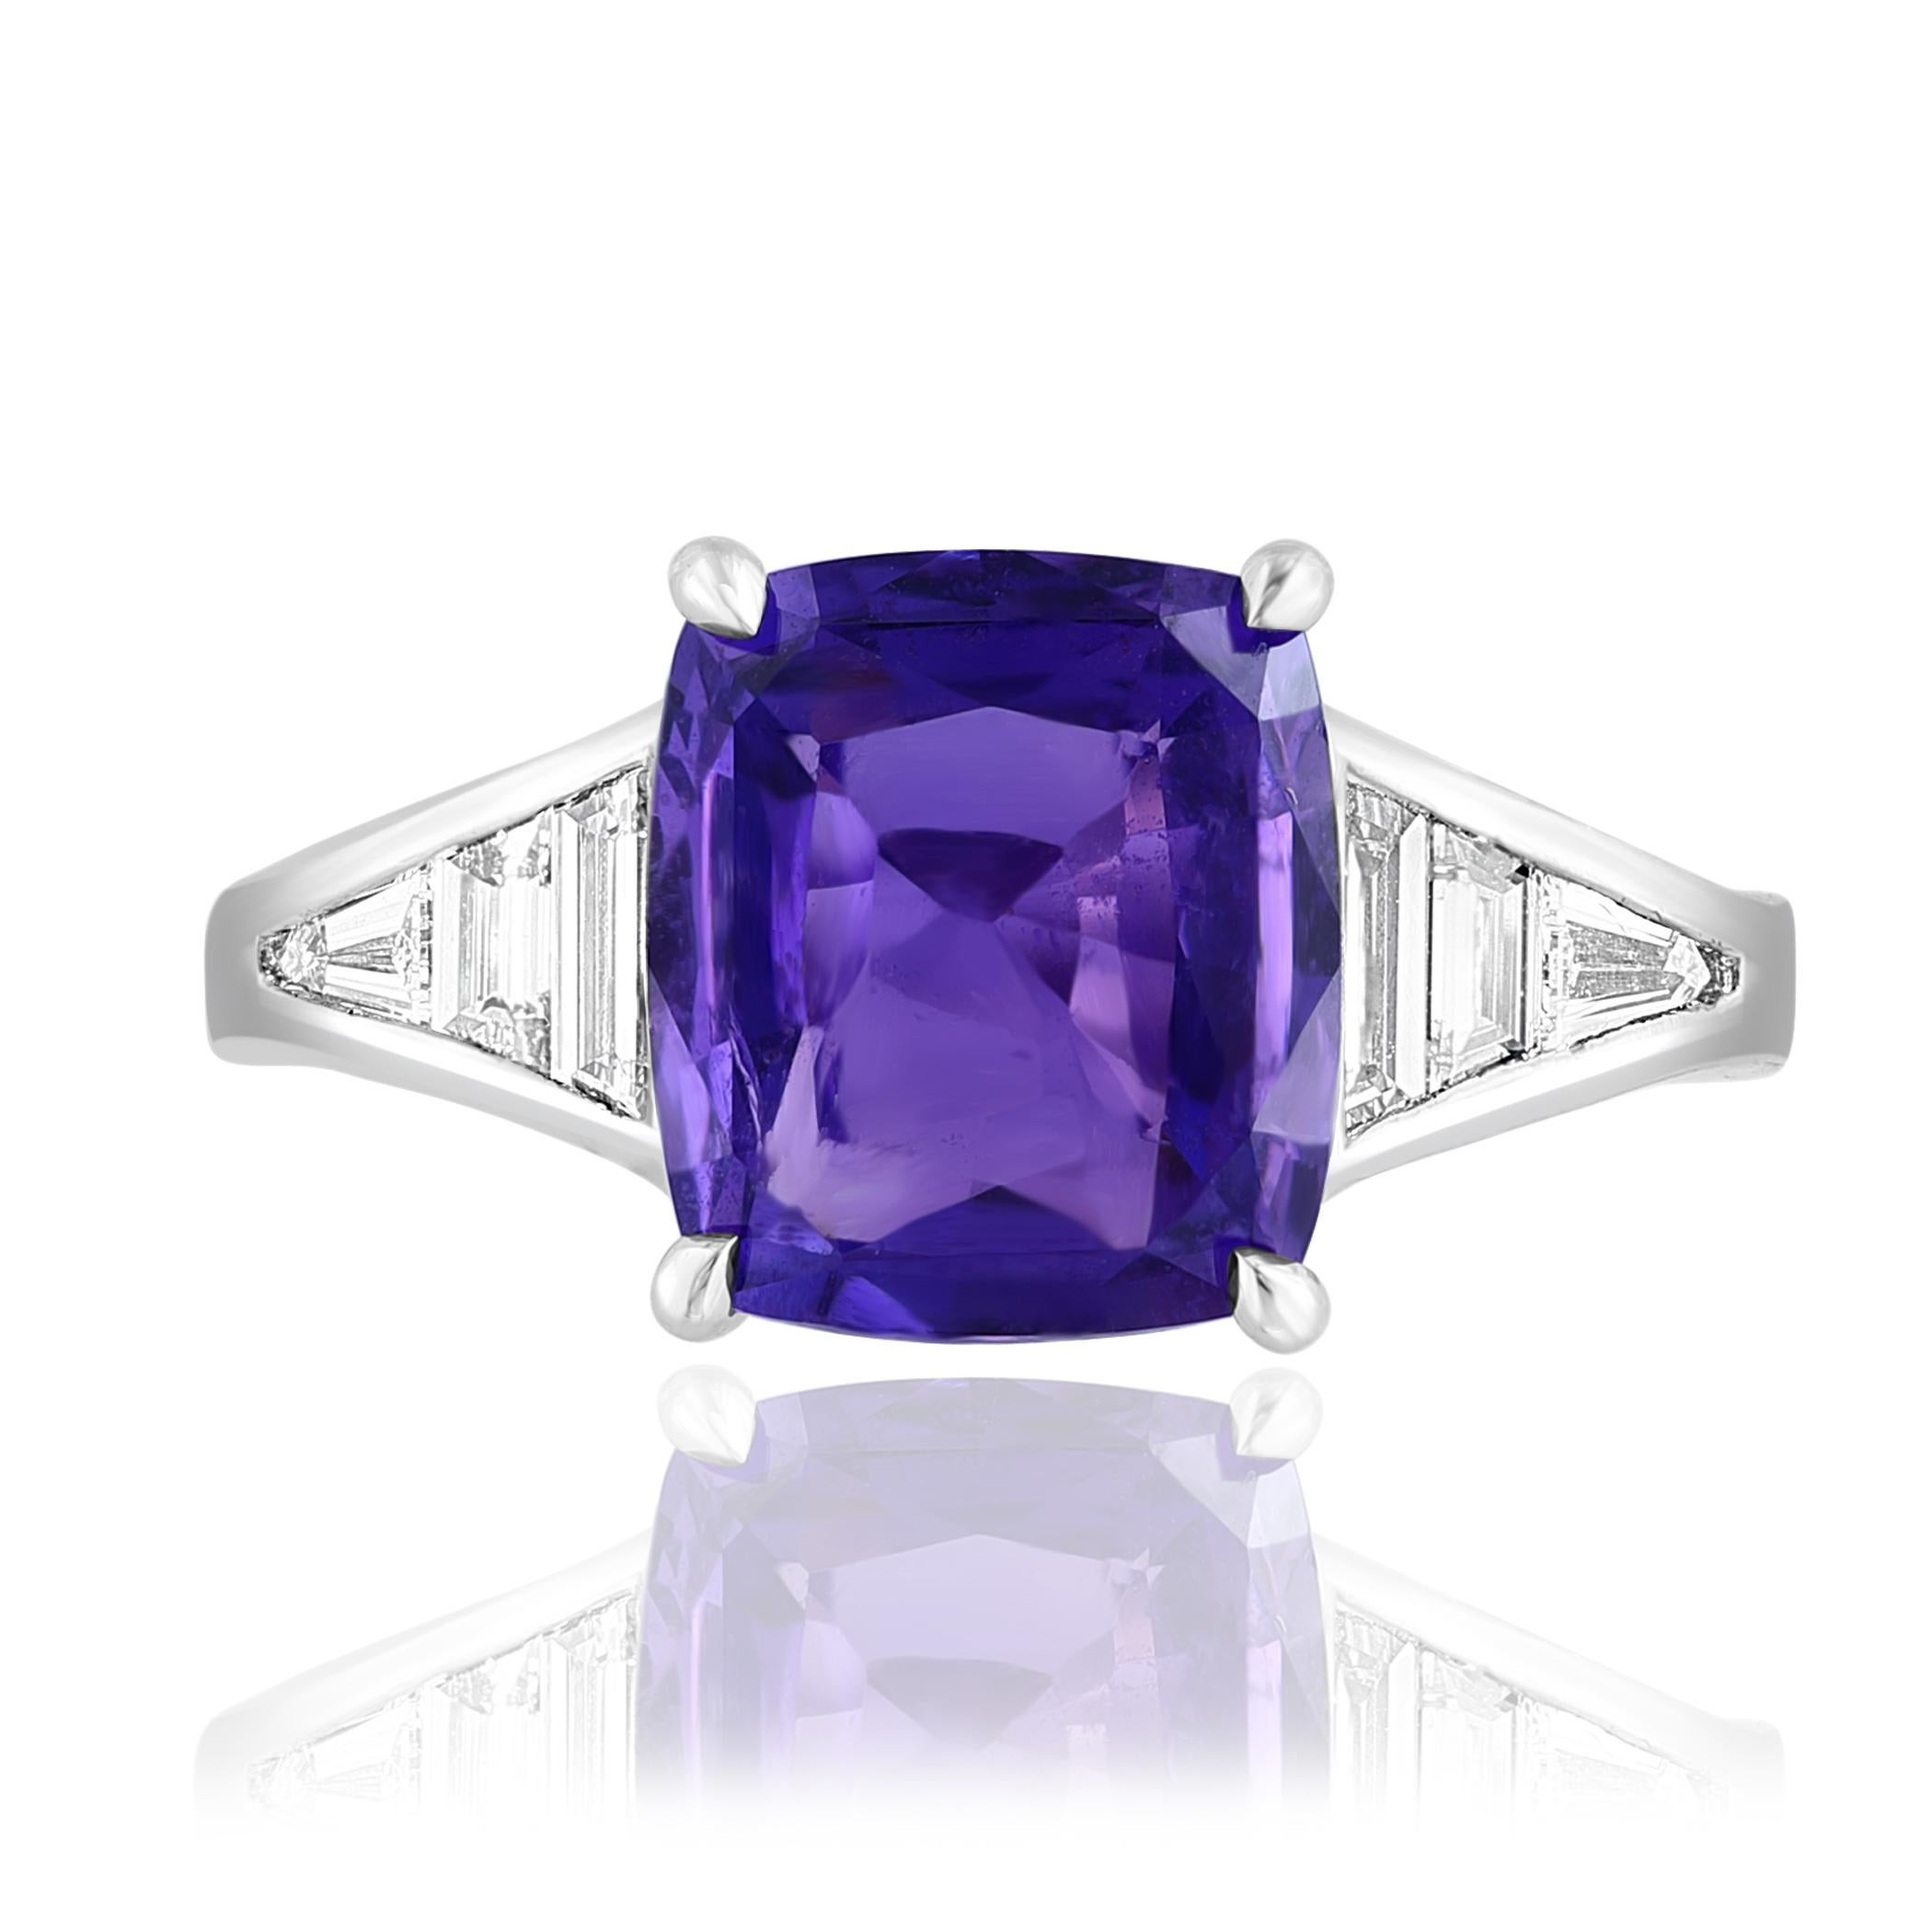 A stunning well-crafted engagement ring showcasing a 3.20-carat Cushion Cut Purple Sapphire. Flanking the center diamond are perfectly matched graduating step-cut diamonds, channel set in a polished platinum mounting. 6 Accent diamonds weigh 0.58